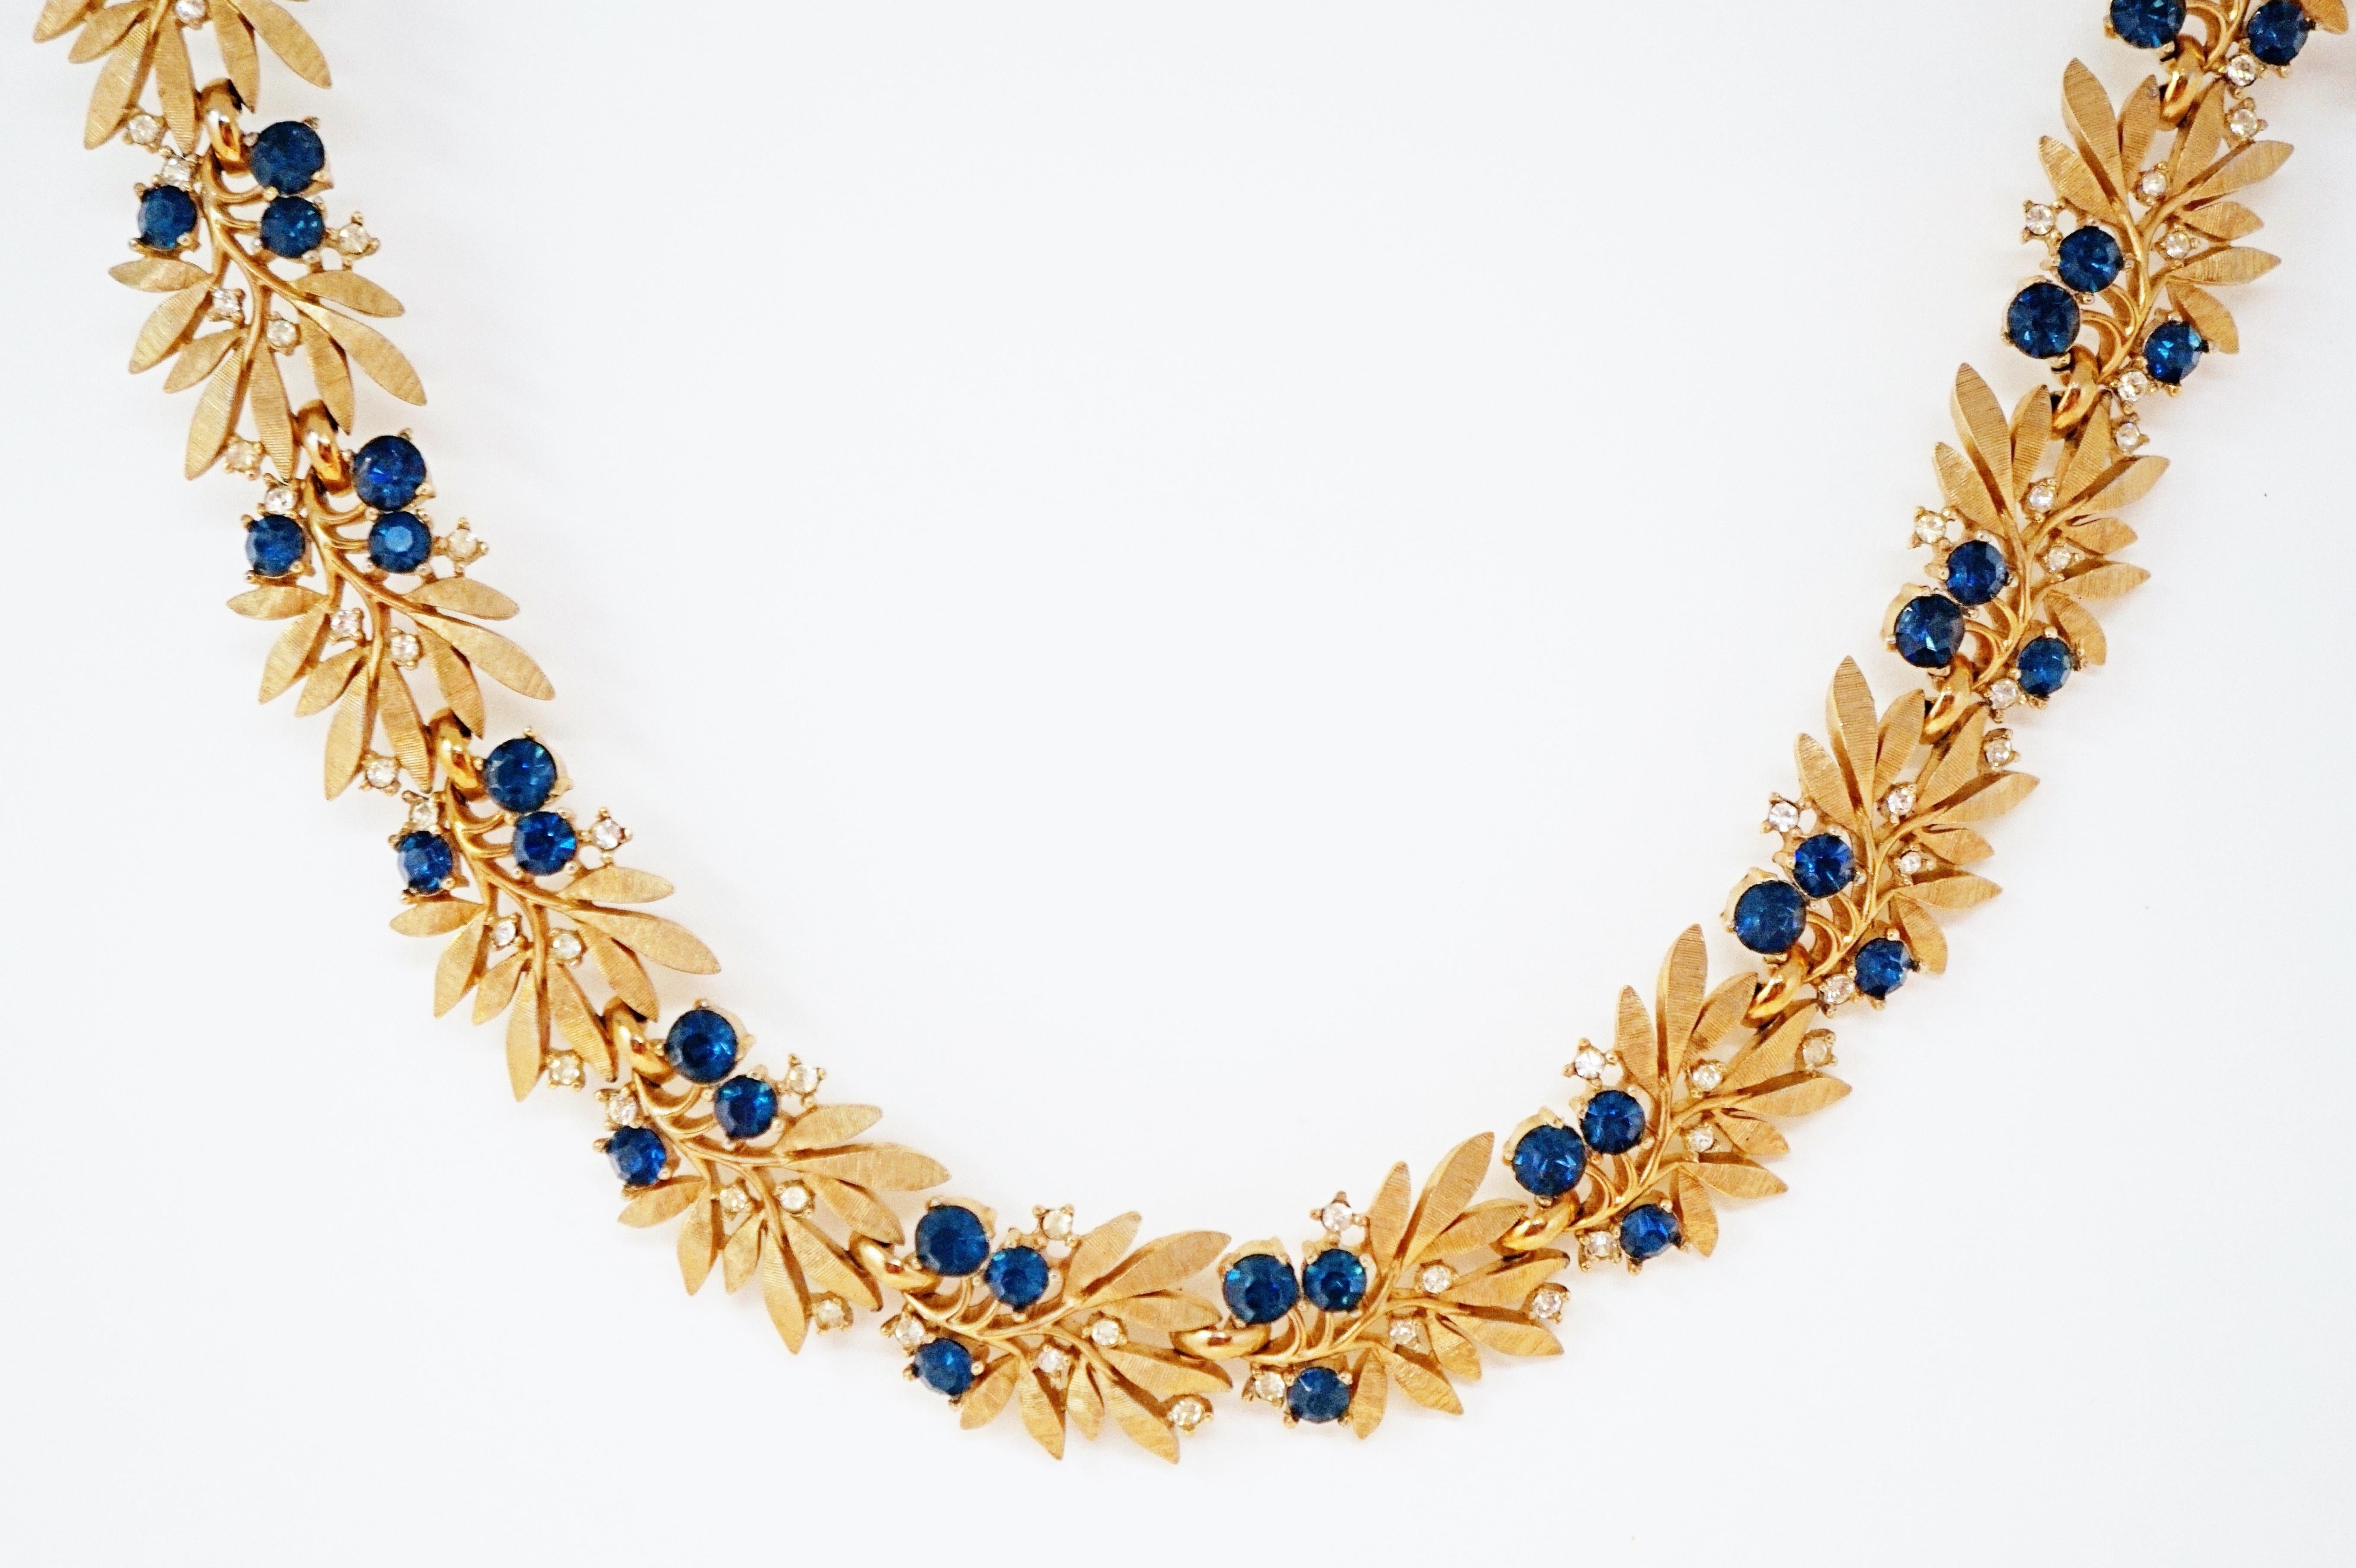 Crown Trifari Gilded Choker Necklace with Rhinestones, Signed, circa 1955 5